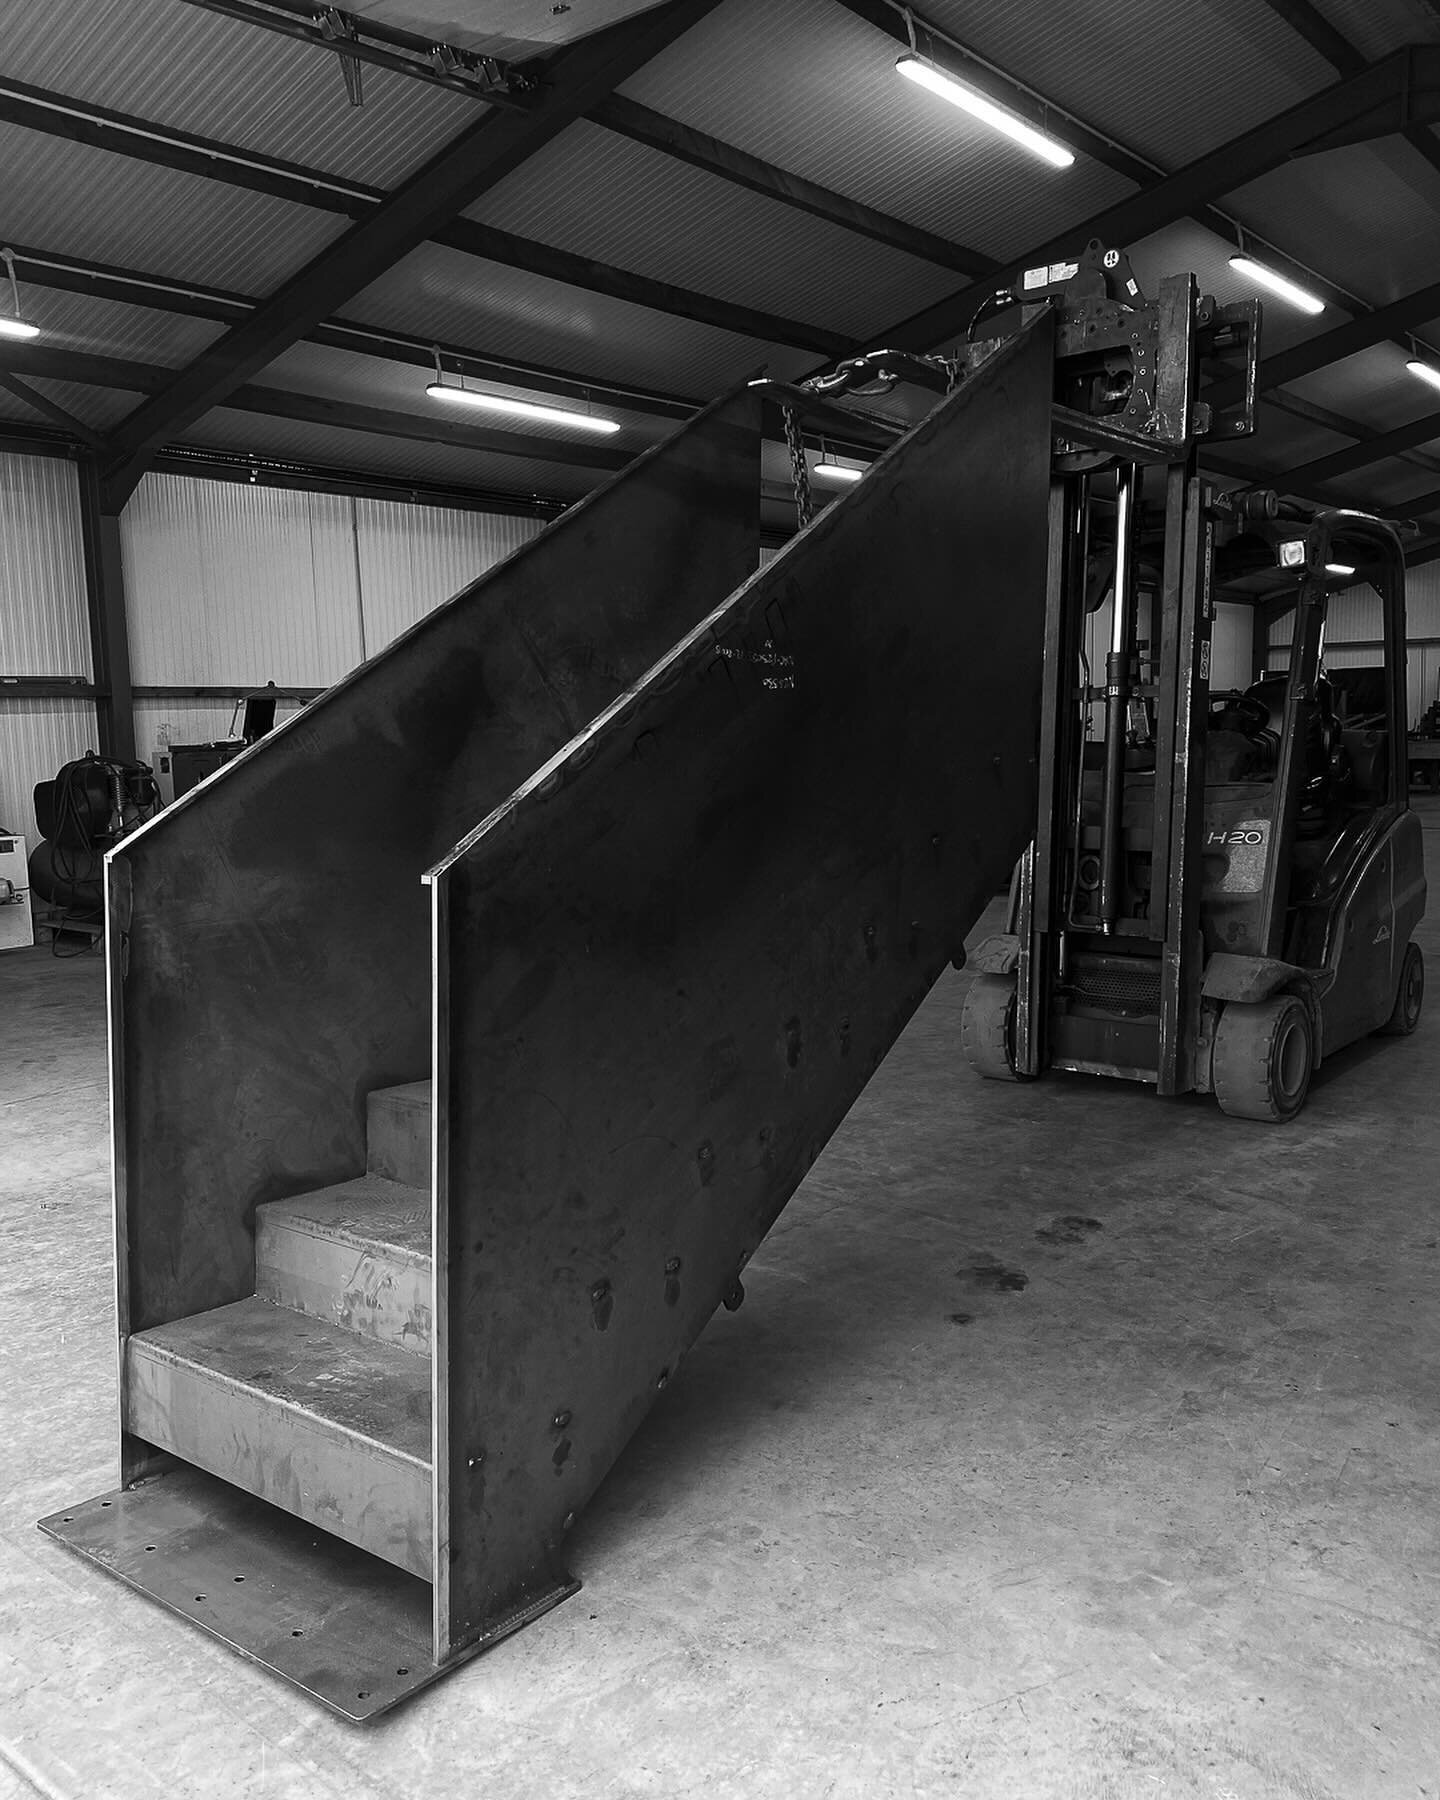 We are excited to be working with the steel craftspeople from @nacrebespoke on our steel stair for our project at 7 Calonne Road in Wimbledon.

#jasongoodarchitecture #architecture #onsite #london #wimbledon #minimal #bespoke #construction #staircase